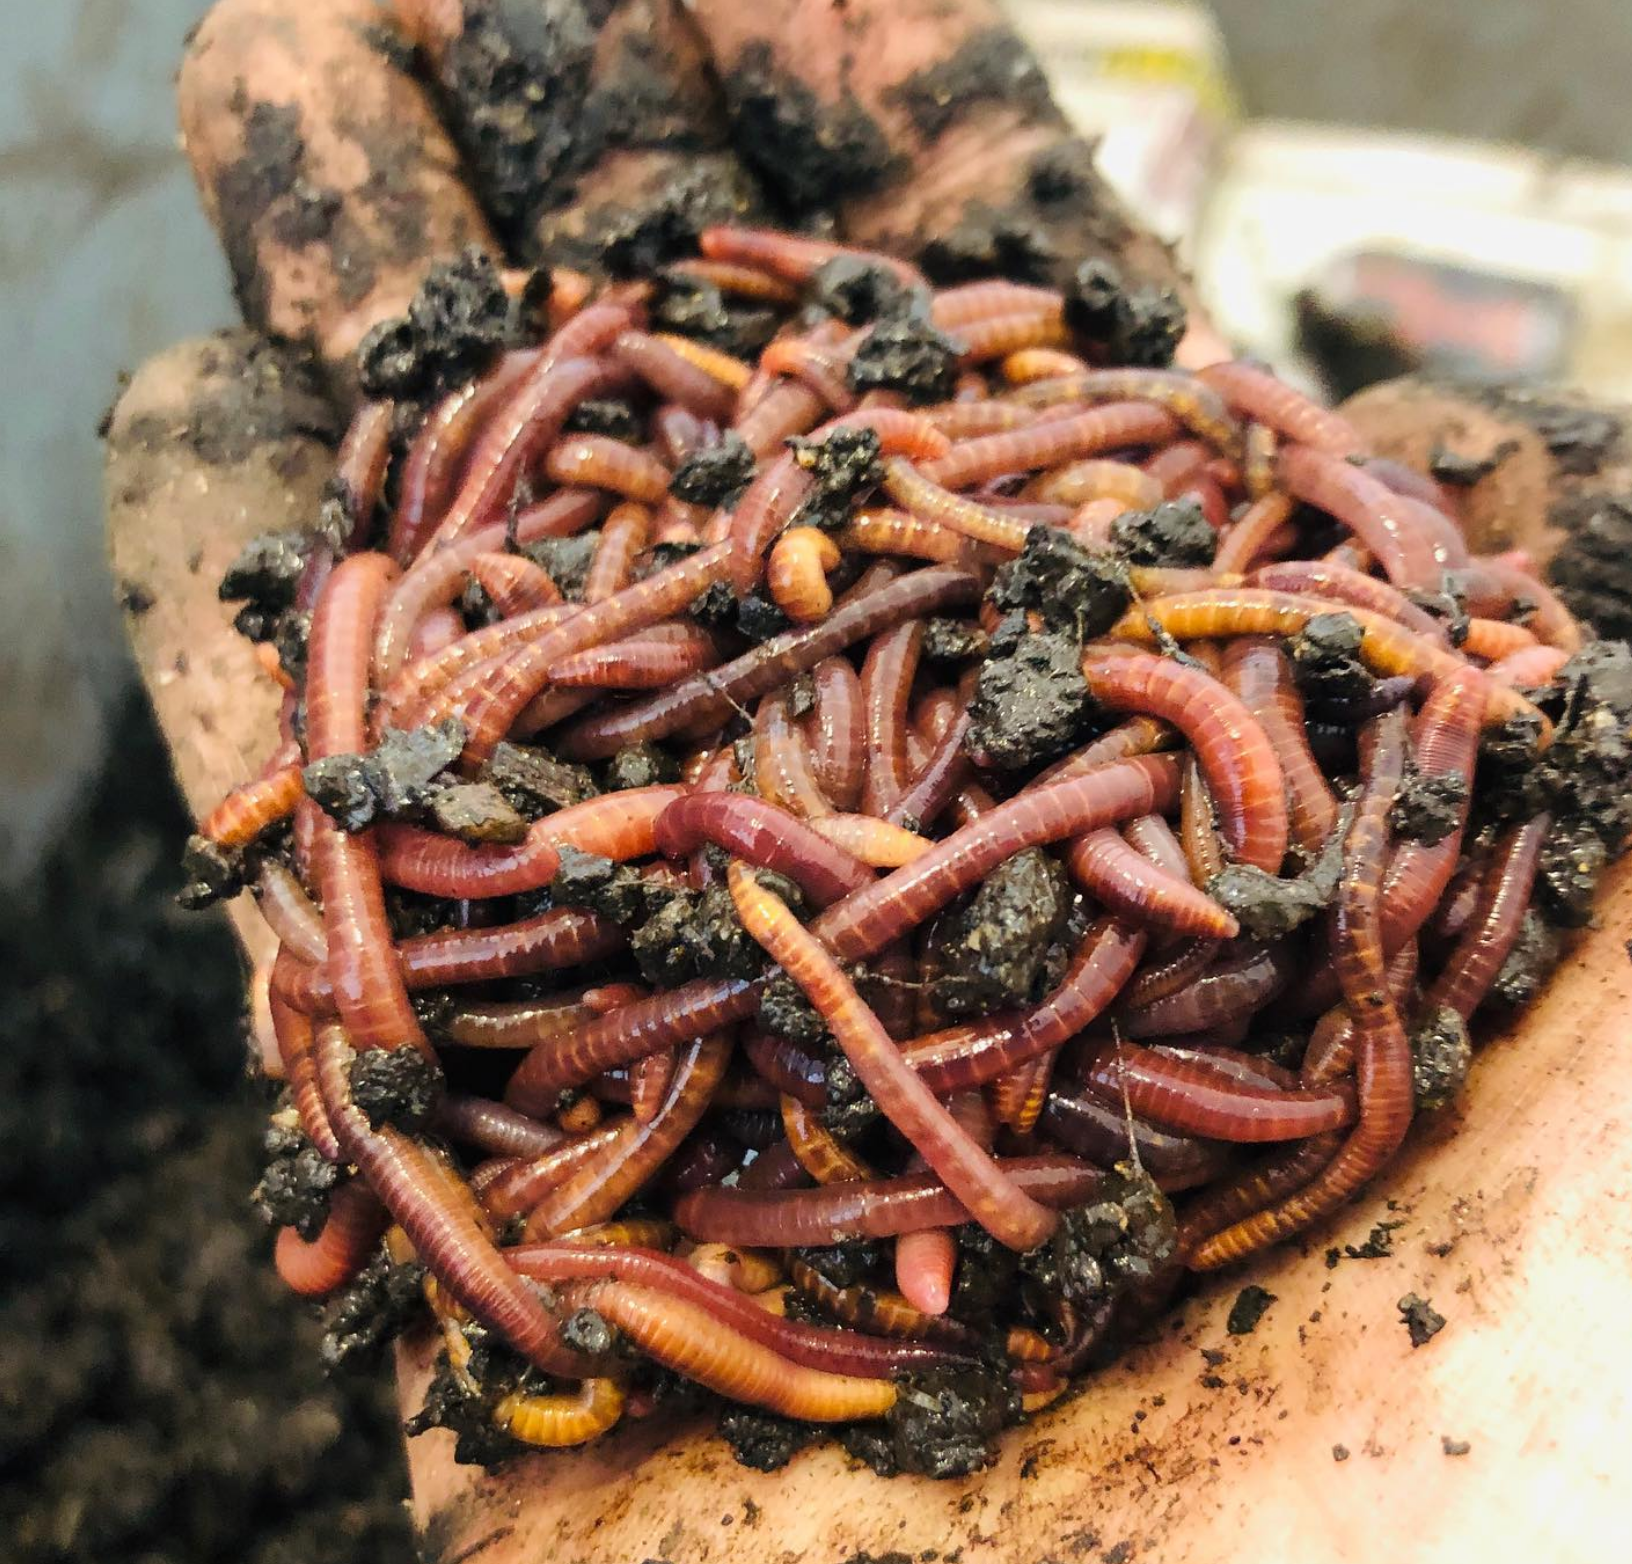 Red worms harvested fresh for an order